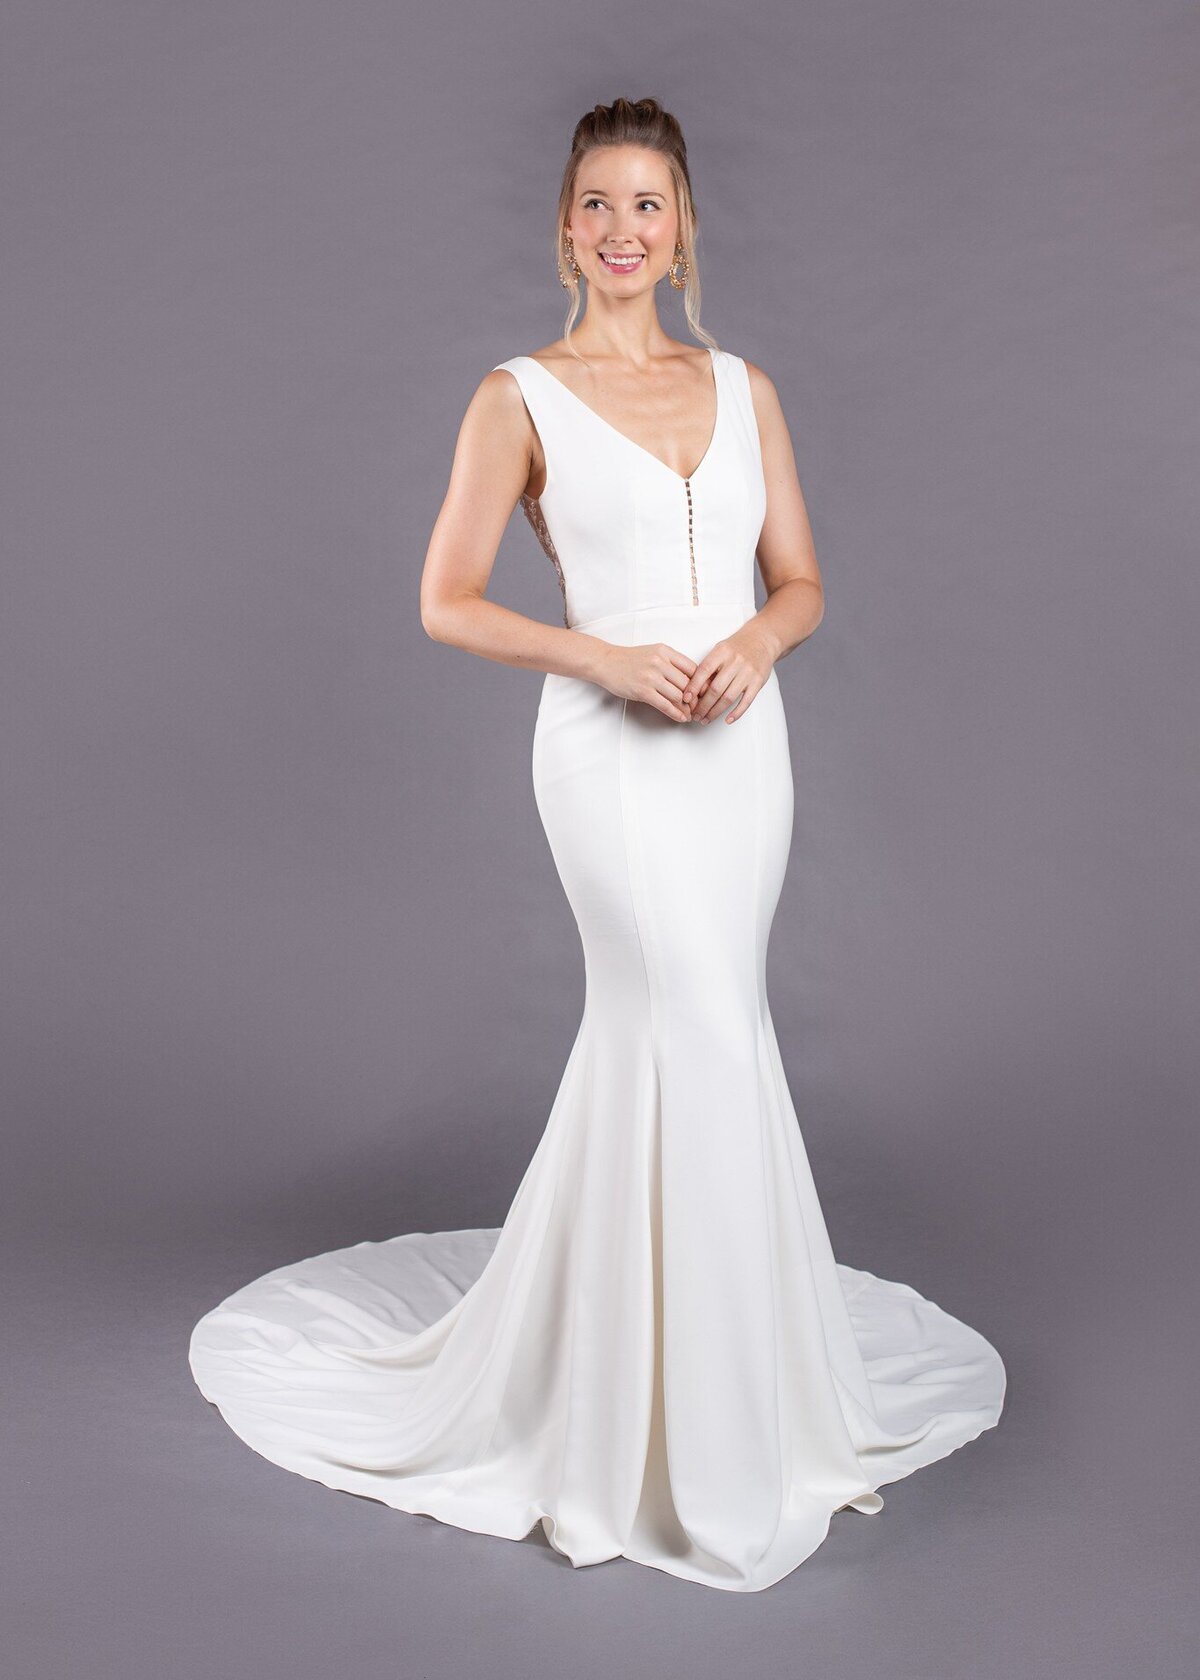 The Jane bridal style is a crepe wedding gown in a fit-and-flare silhouette with a pearl embellished v-neck bodice.